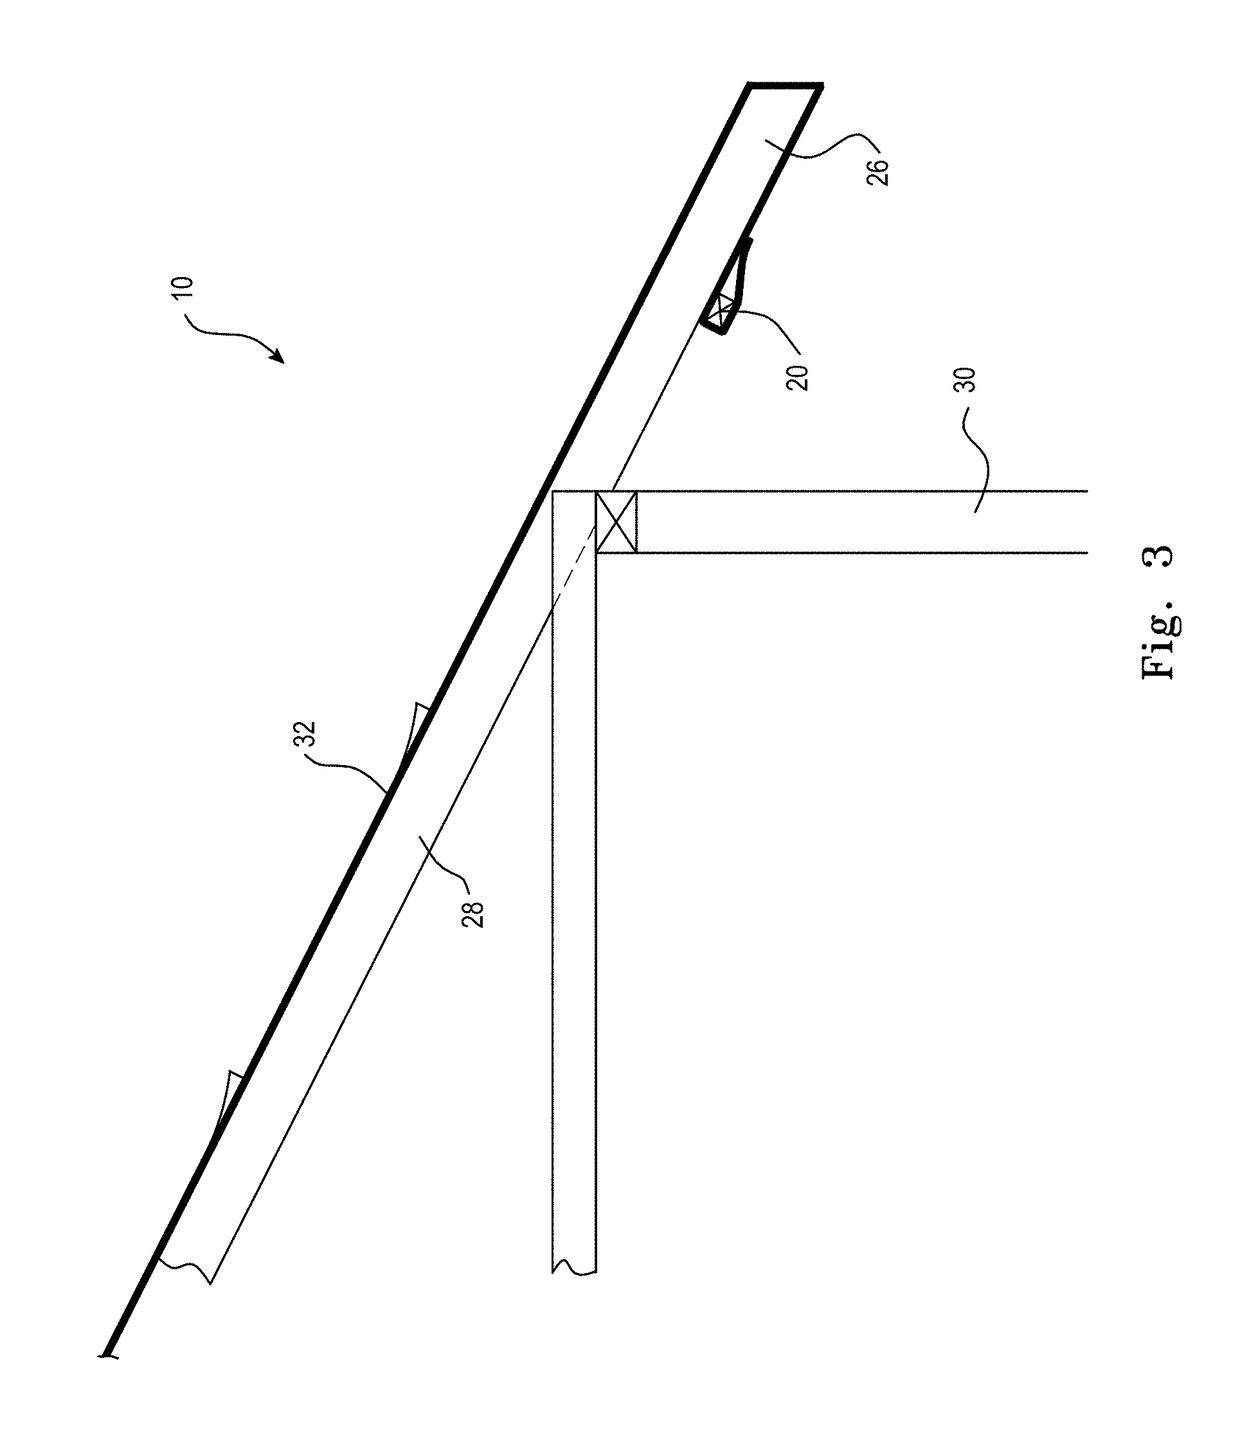 Heat shrink covering of built structures and method